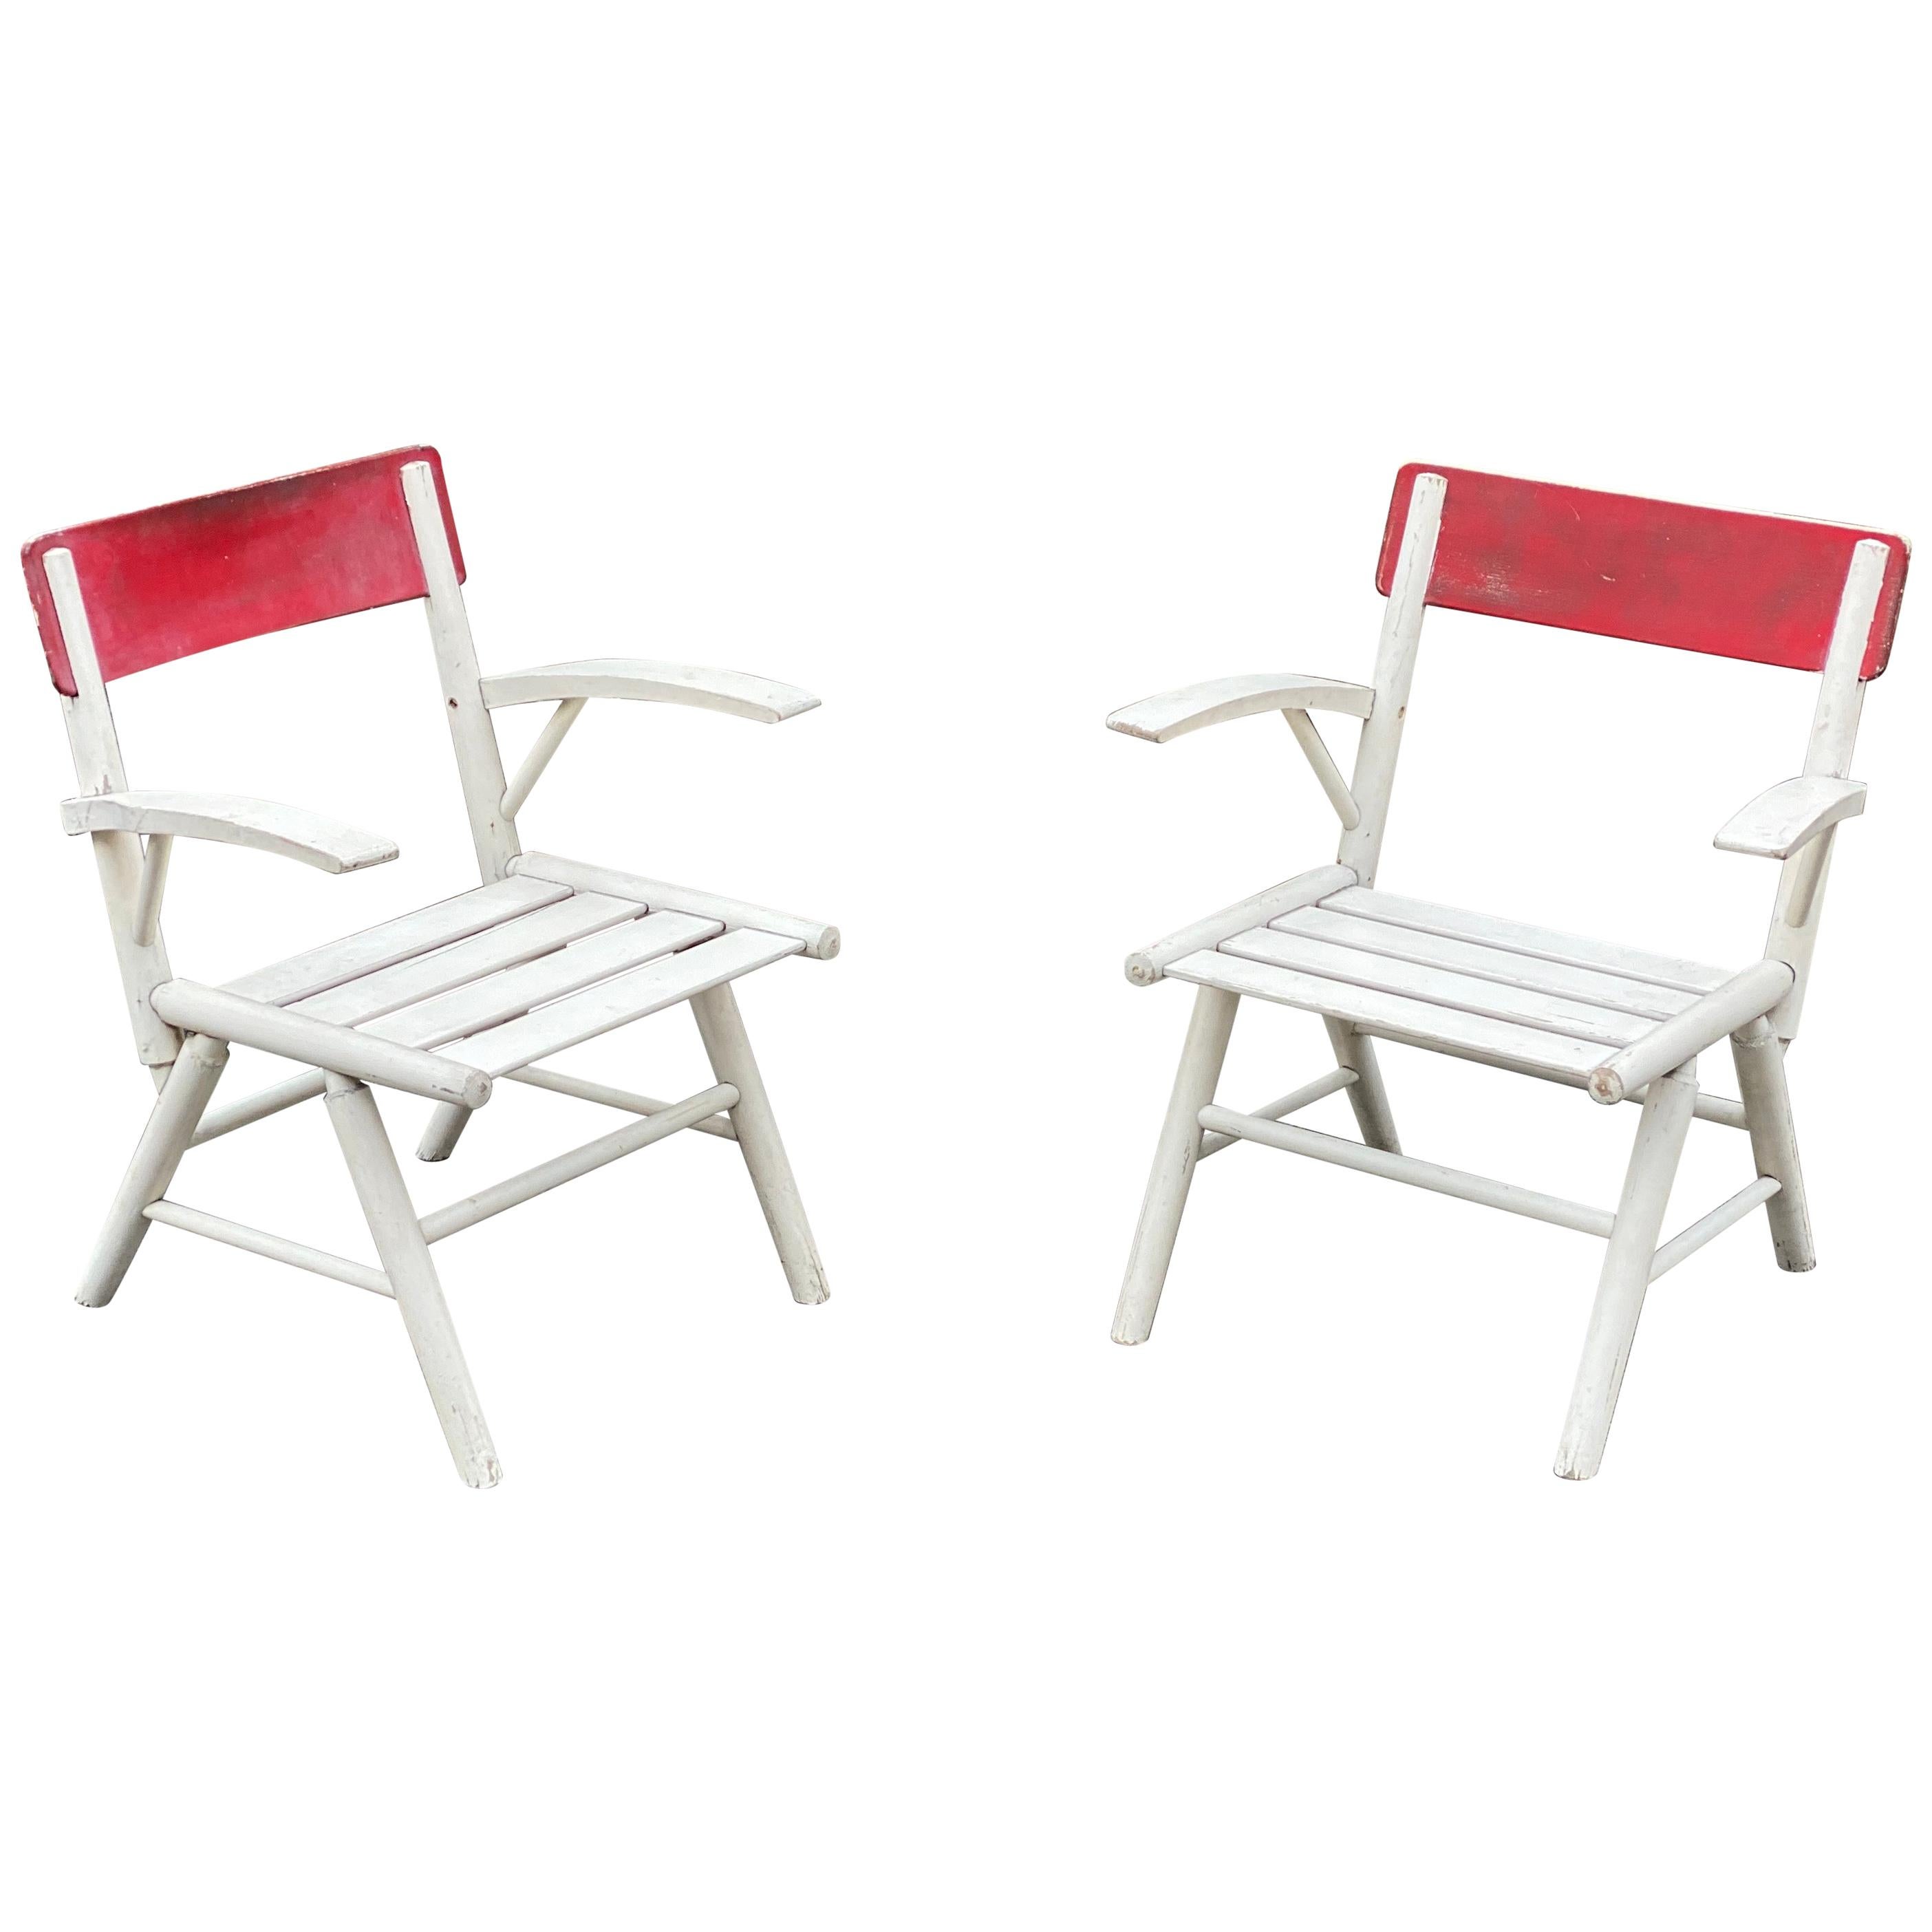 2 Garden or Veranda Armchairs in Lacquered Wood, circa 1950-1960 For Sale